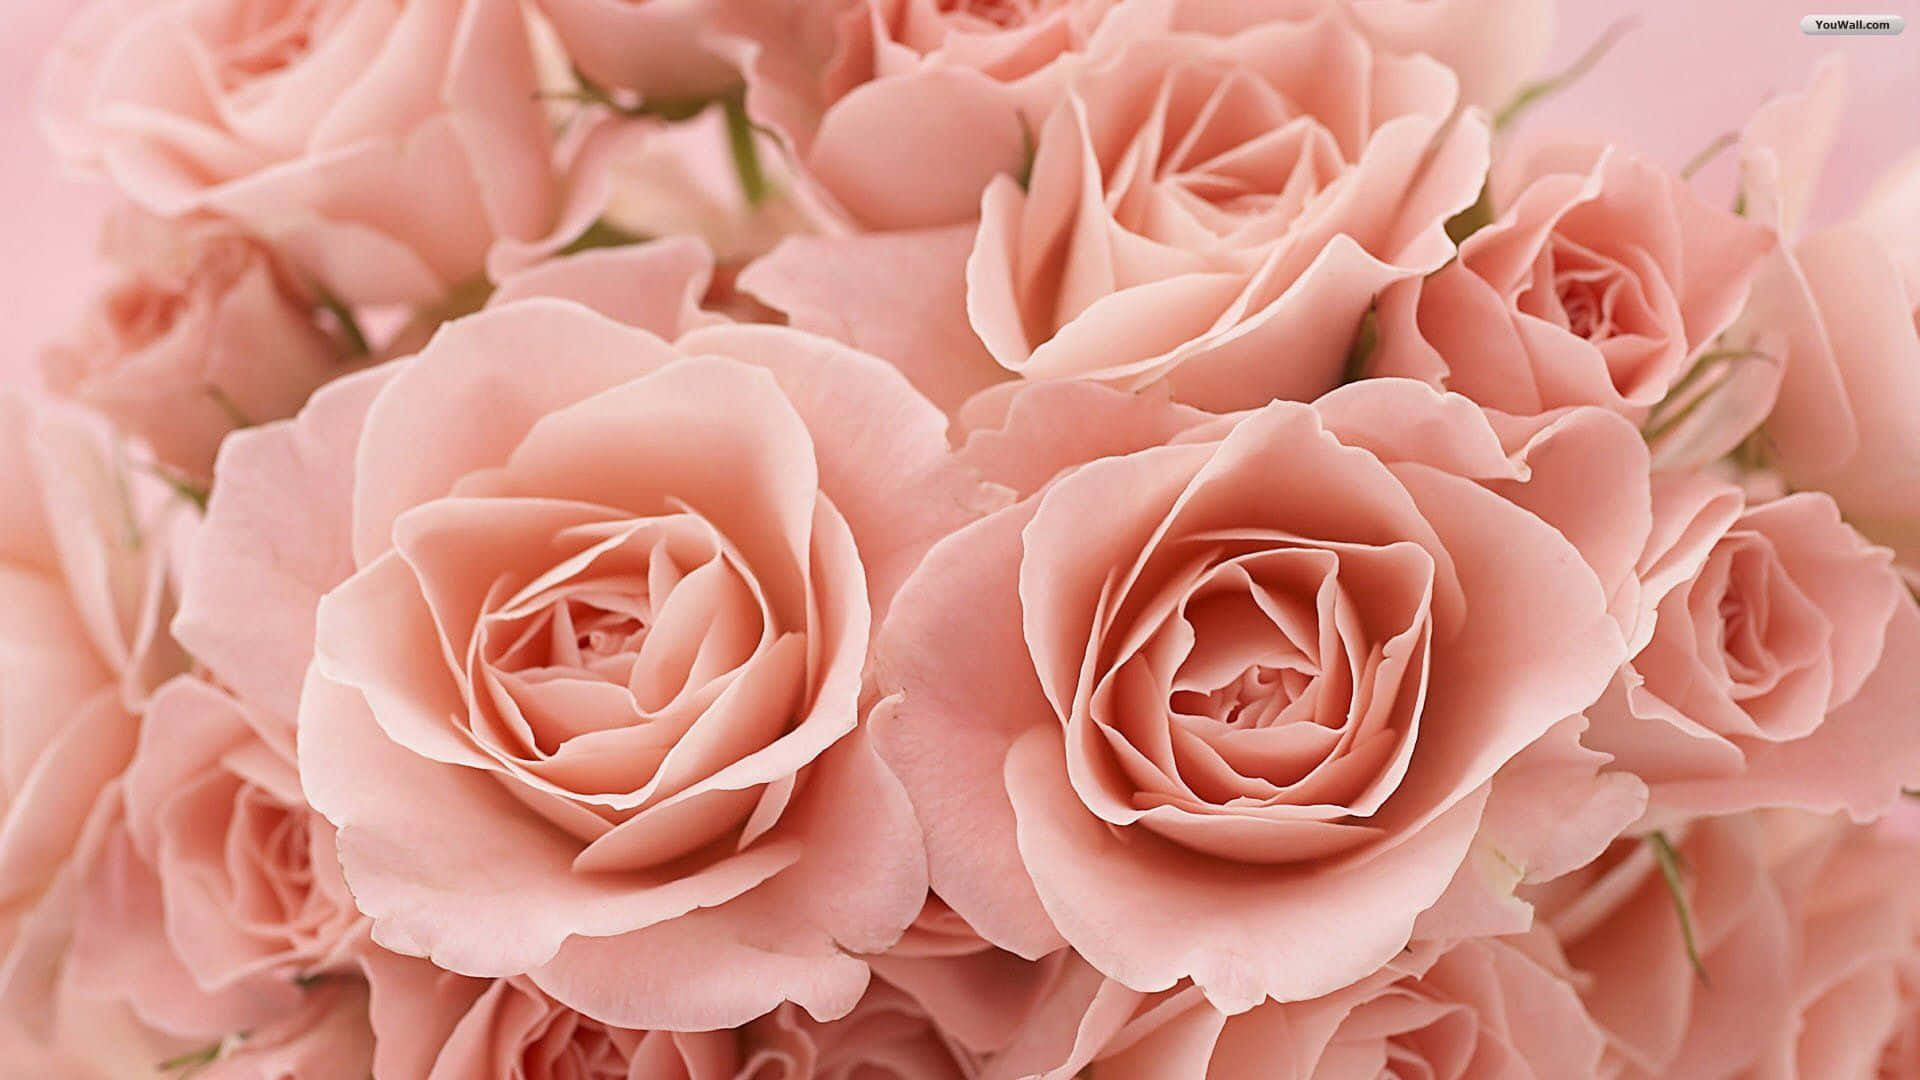 A bouquet of vibrant roses to brighten up your day Wallpaper